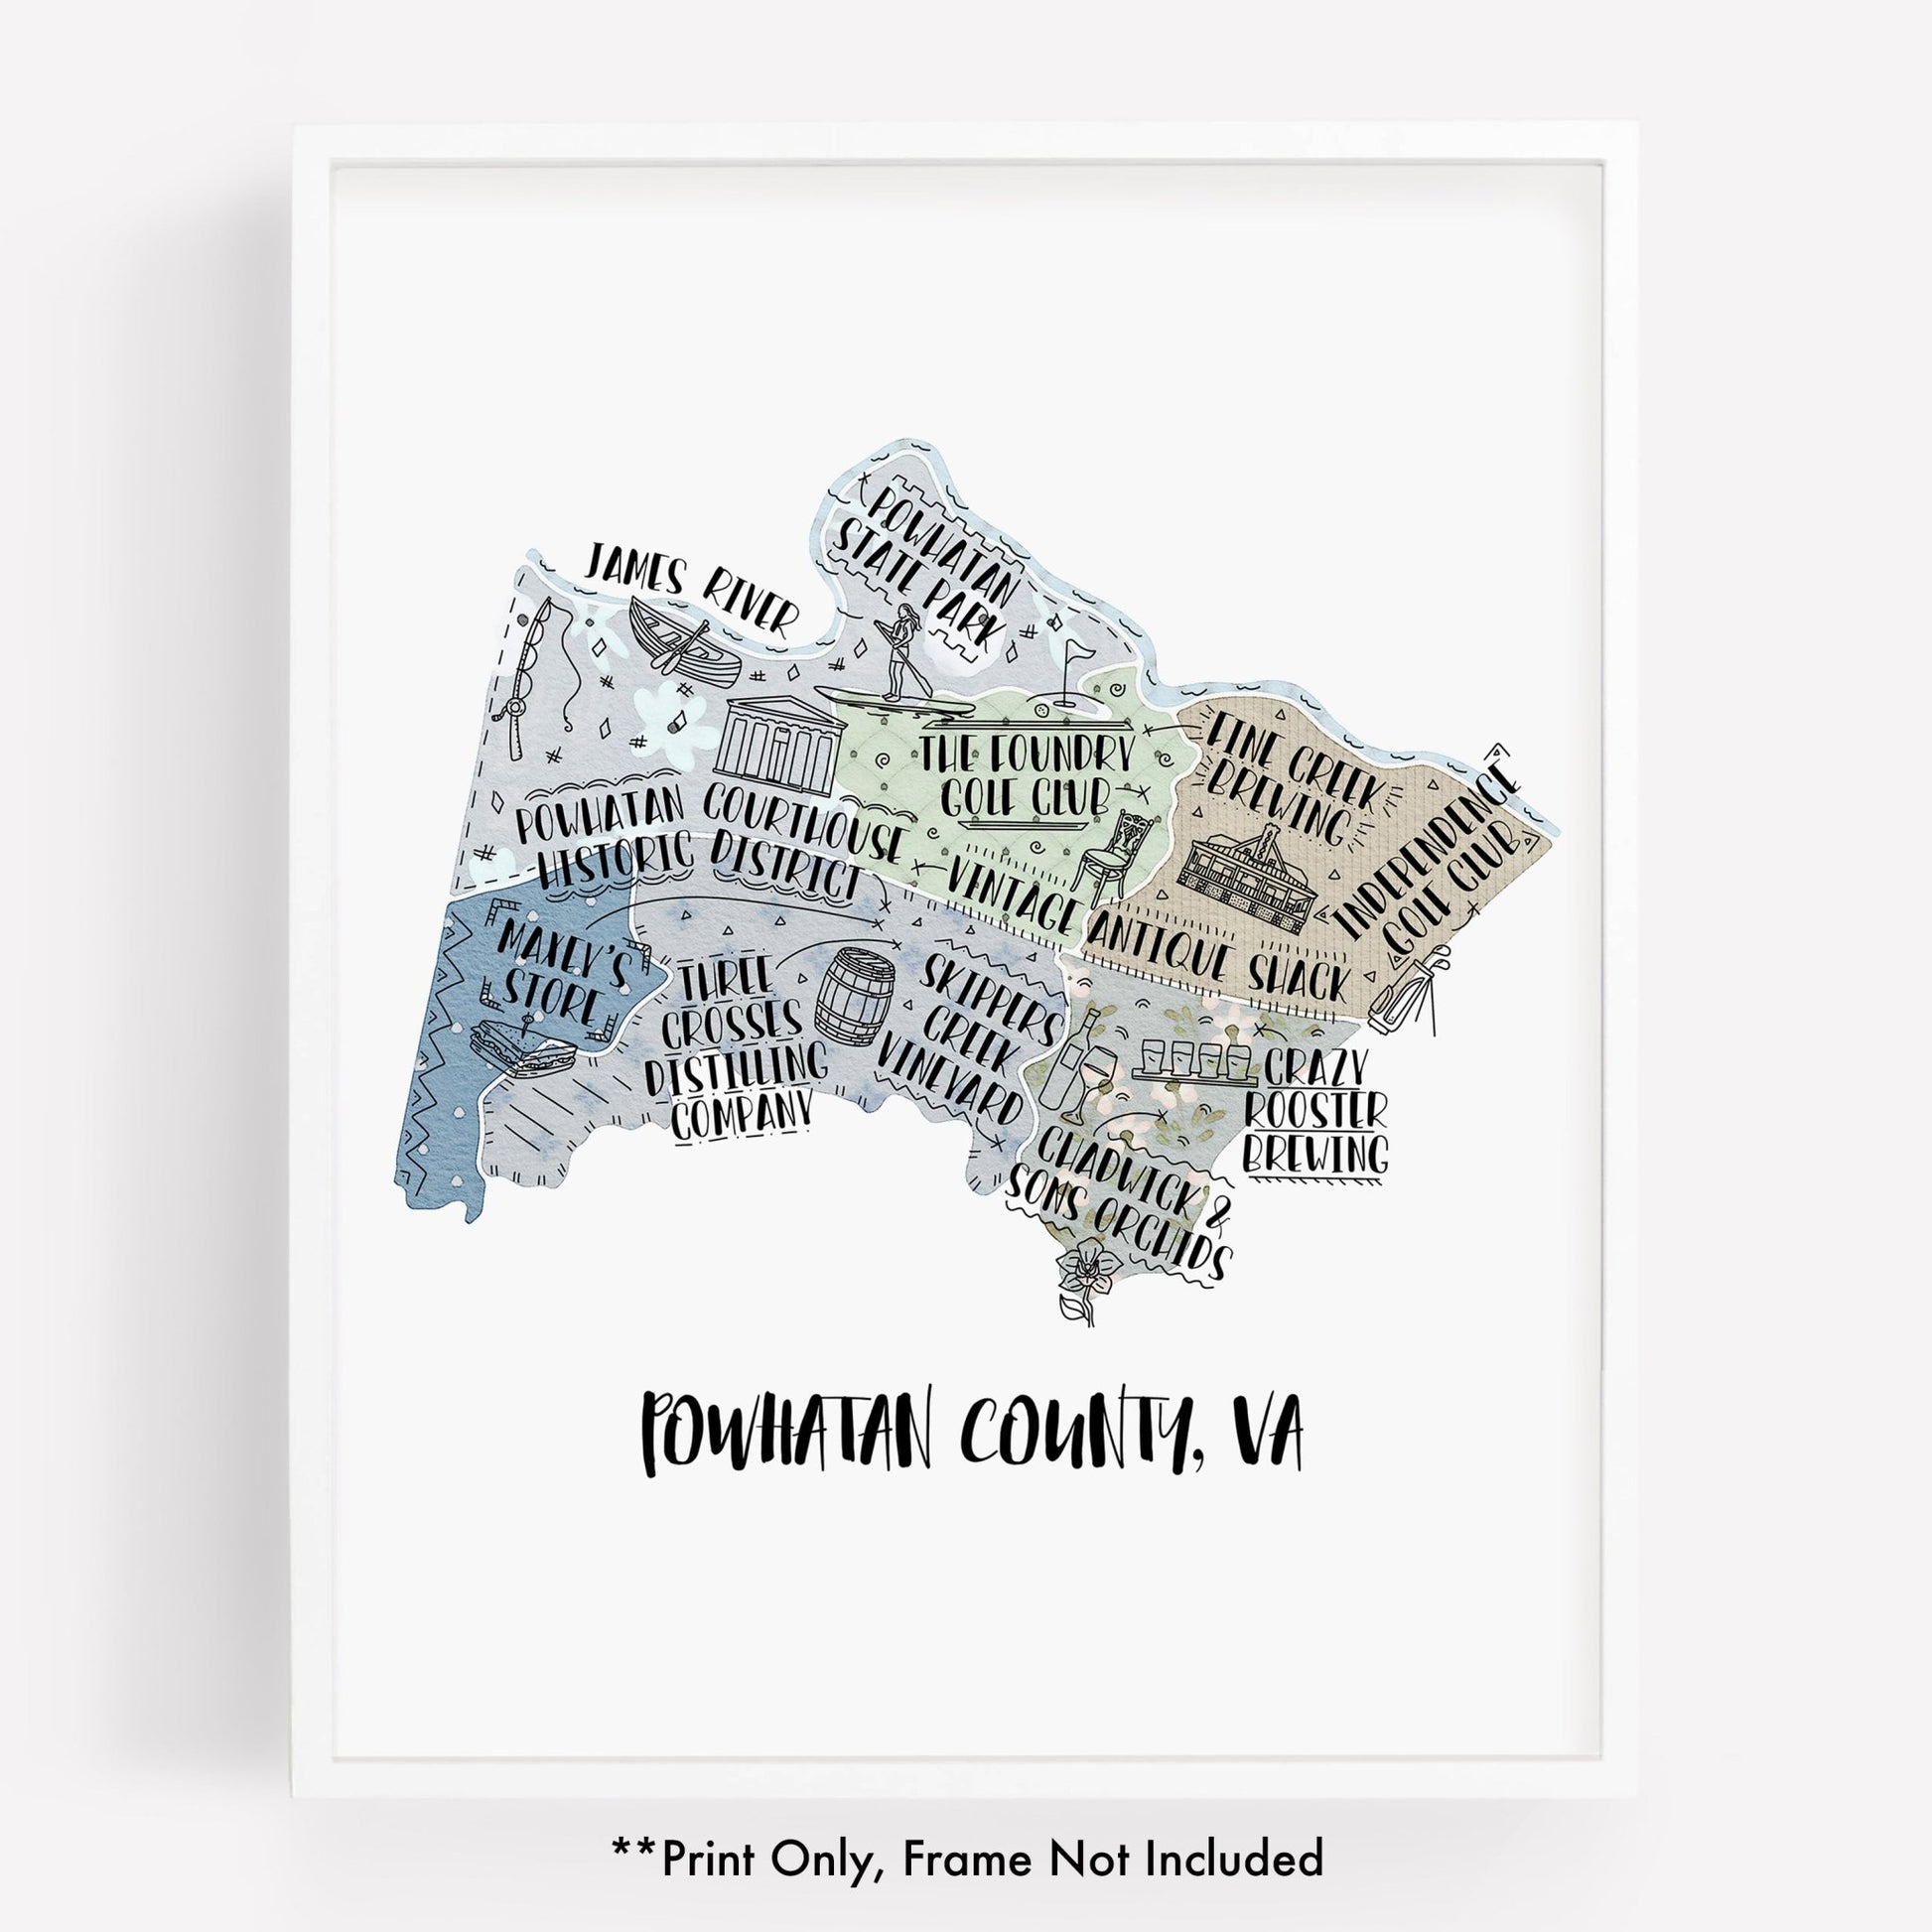 An illustrated map of Powhatan County VA, as a print - Sparks House Co